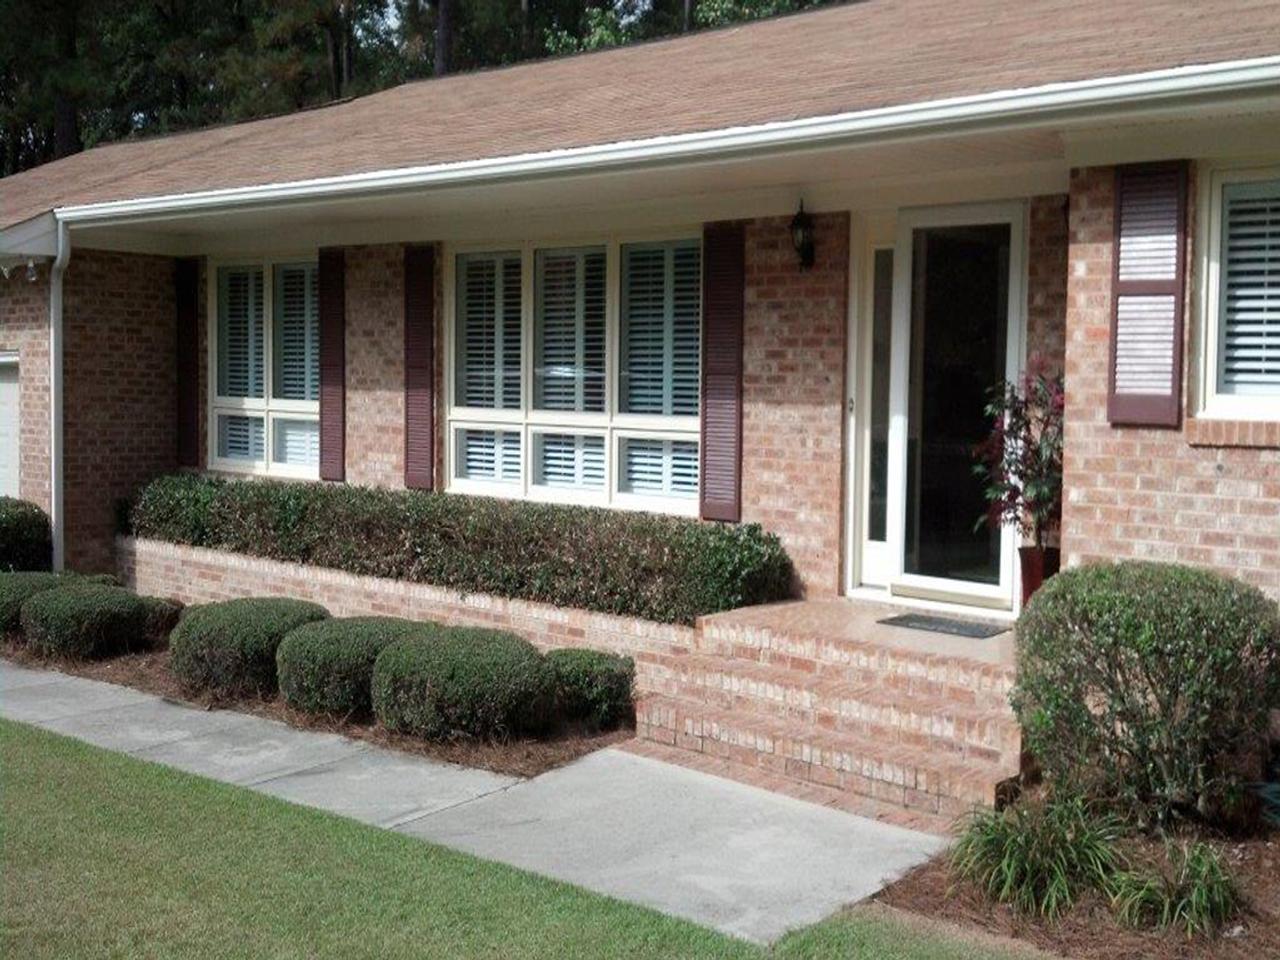 Exterior view of brick house with low divider rail and louvered exterior shutters